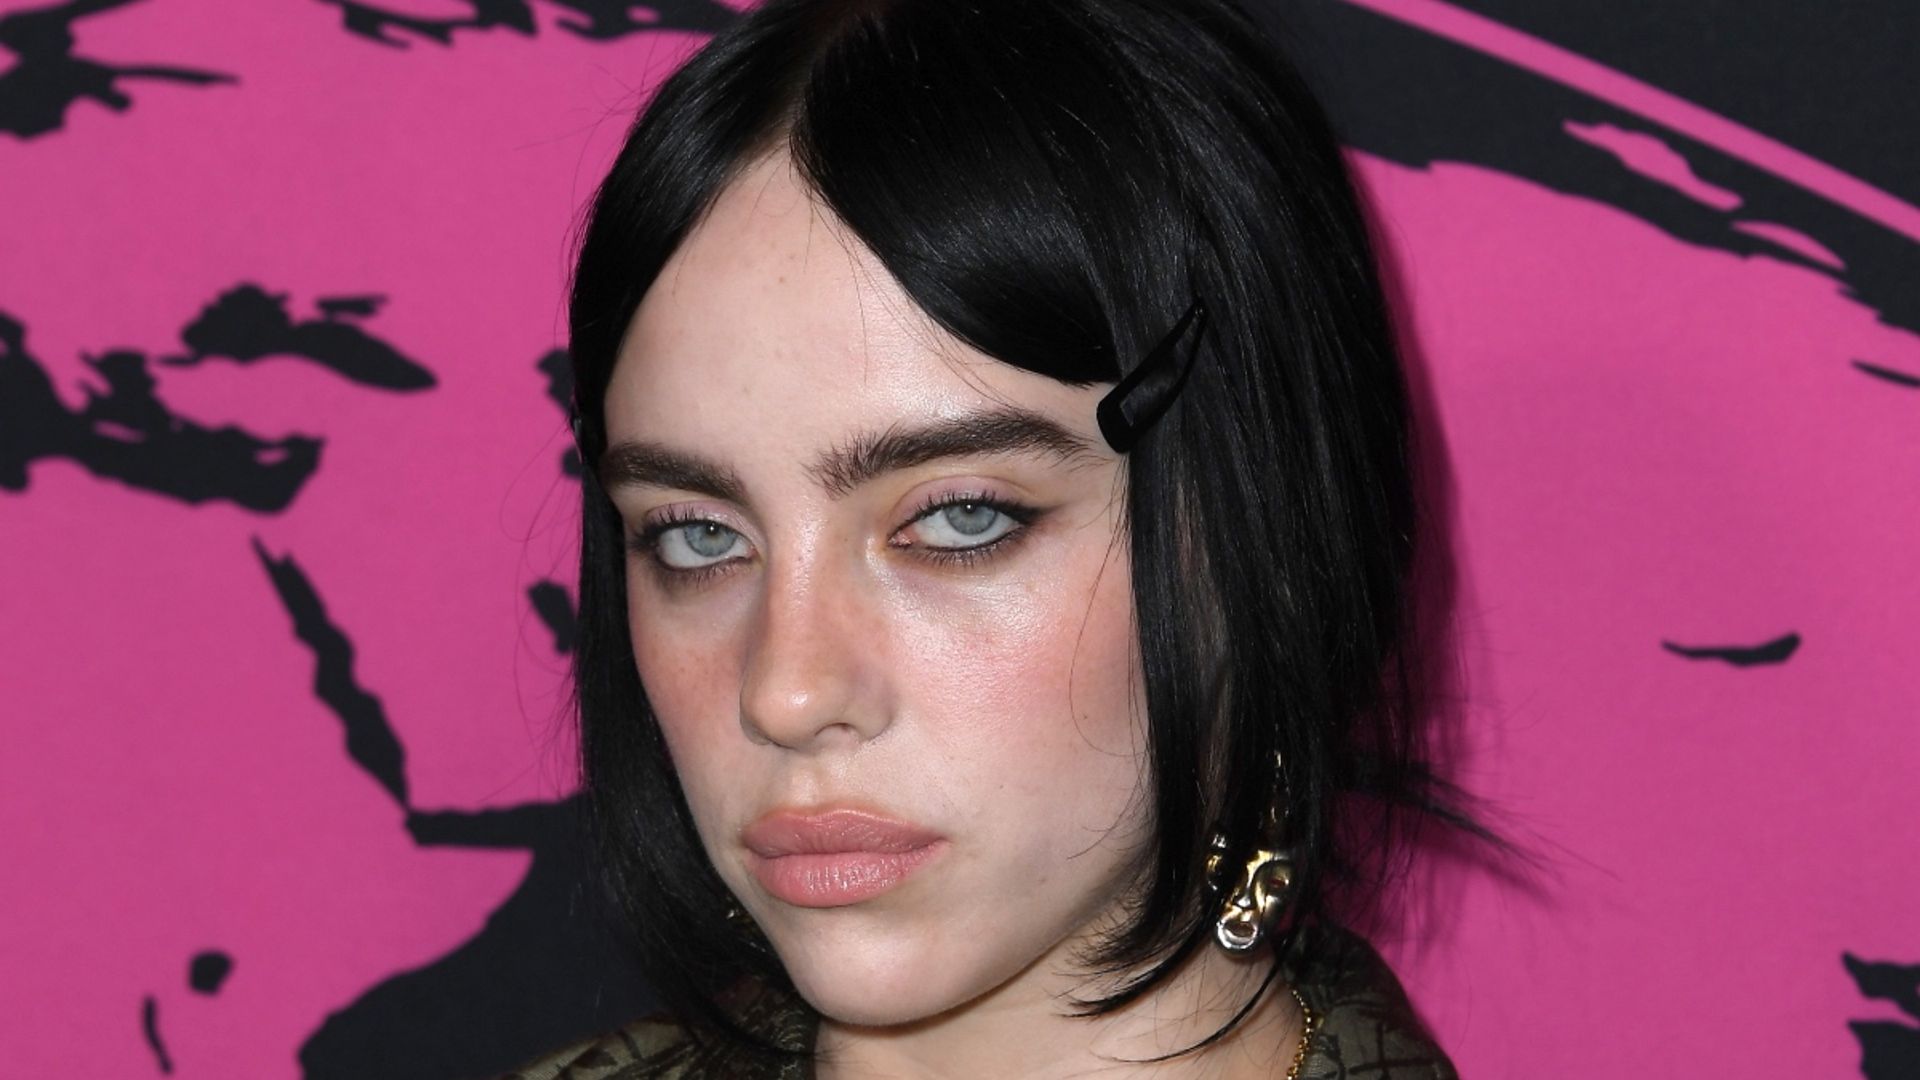 Billie Eilish's Best Beauty and Fashion Looks Show Off Her Unique